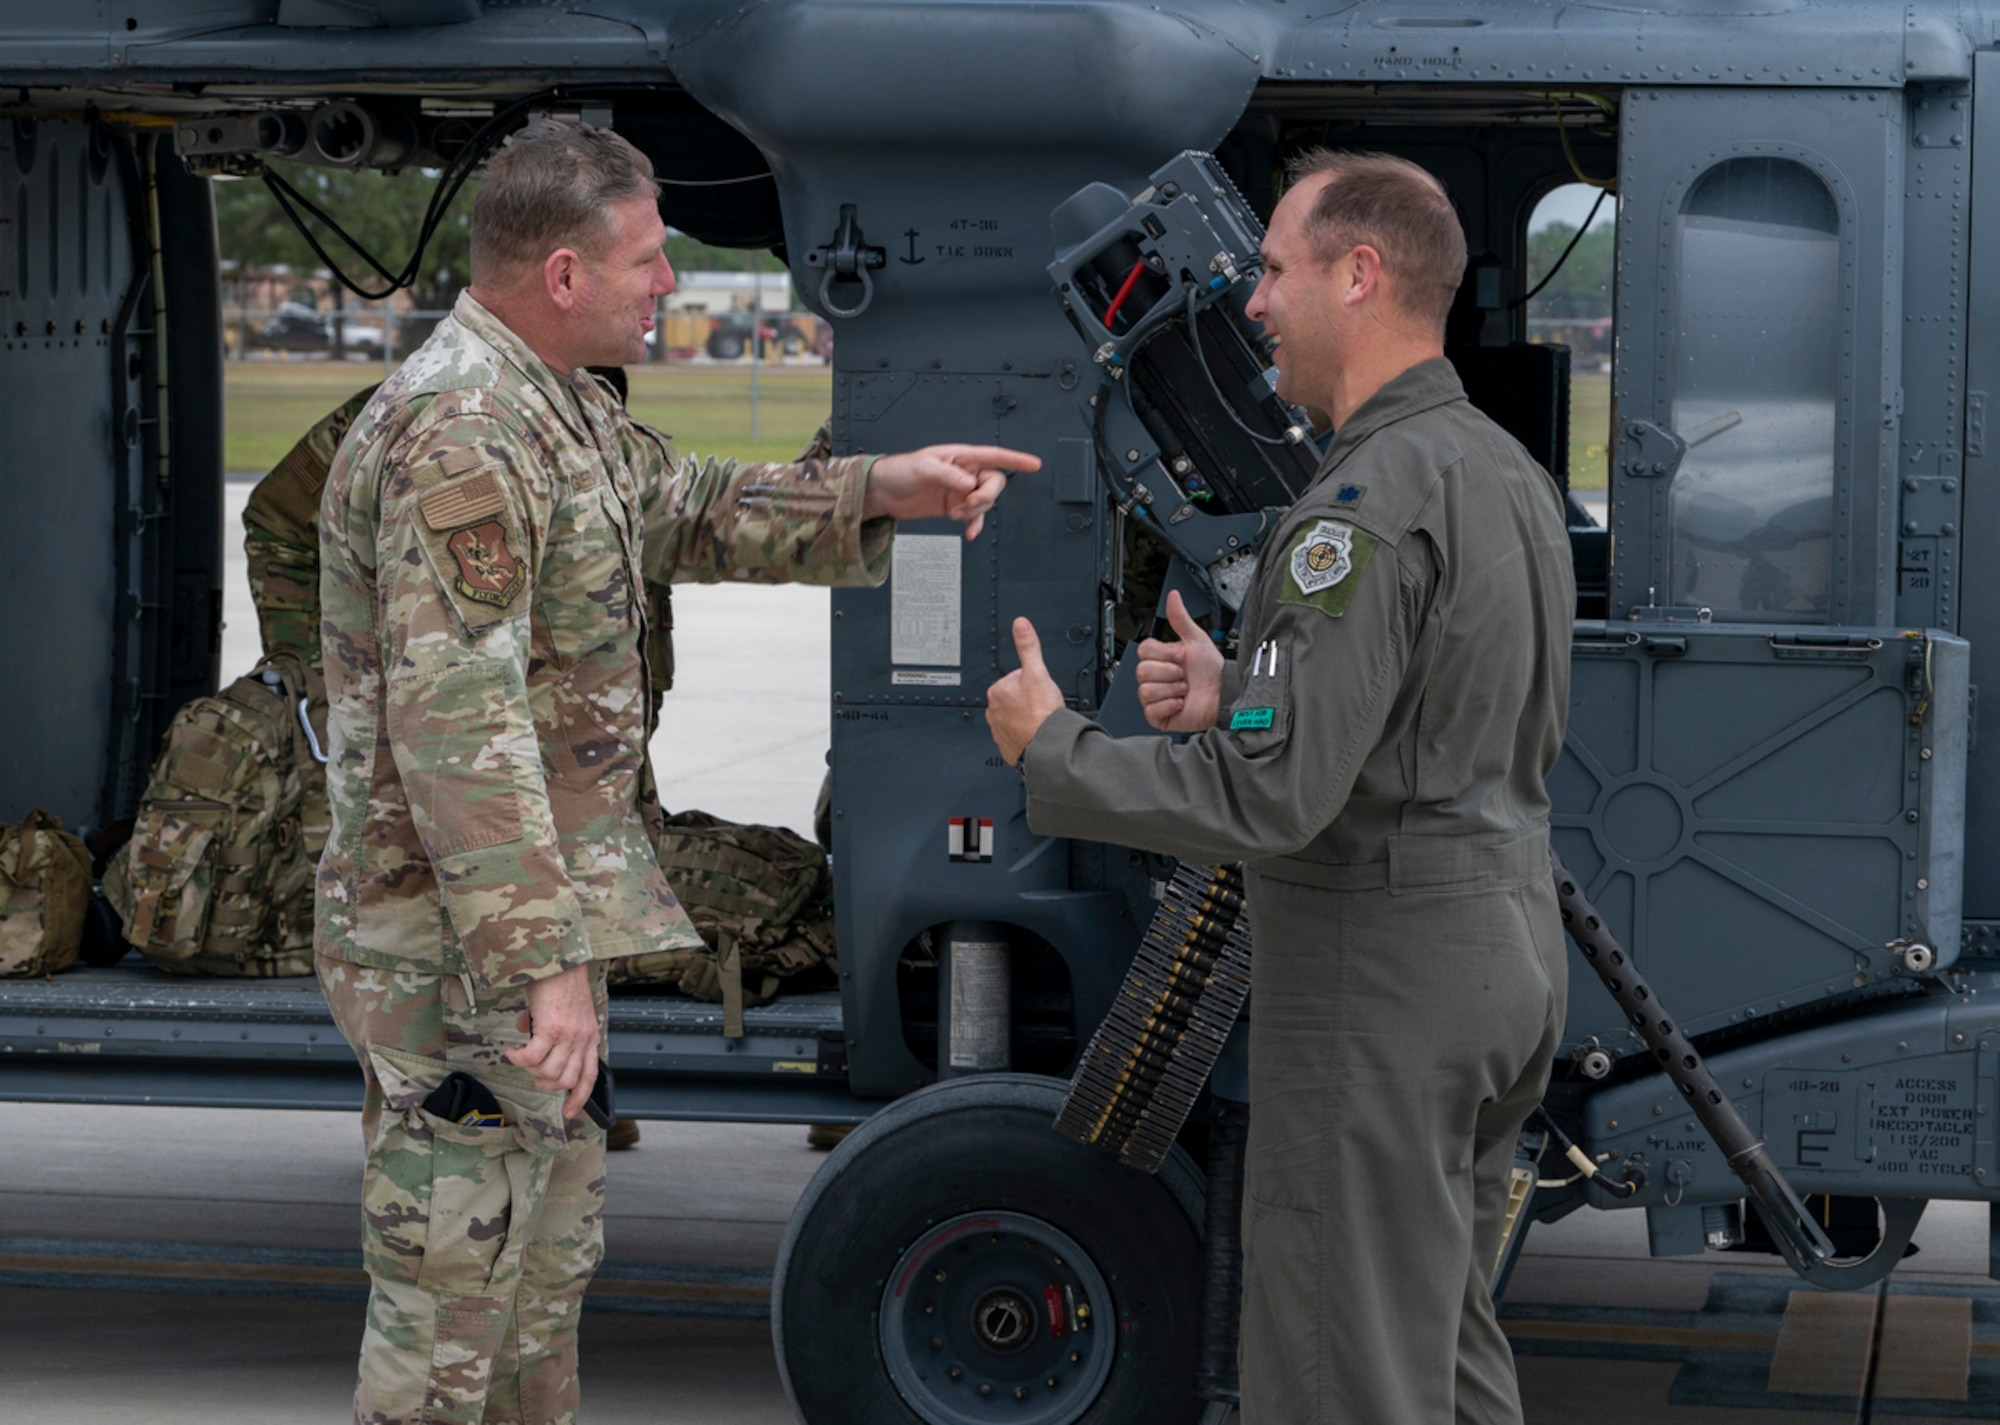 U.S. Air Force Chief Master Sgt. Justin Geers, 23rd Wing command chief, left, chats with U.S. Air Force Lt. Col. Thaddeus Ronnau, 41st Rescue Squadron commander, during exercise Mosaic Tiger 24-1 at Avon Park Air Force Range, Florida, Nov. 16, 2023. Mosaic Tiger 24-1 is a weeklong exercise designed to test the 23rd Wing's ability to generate airpower at austere or dispersed locations while combating degraded communications. (U.S. Air Force photo by Airman 1st Class Leonid Soubbotine)